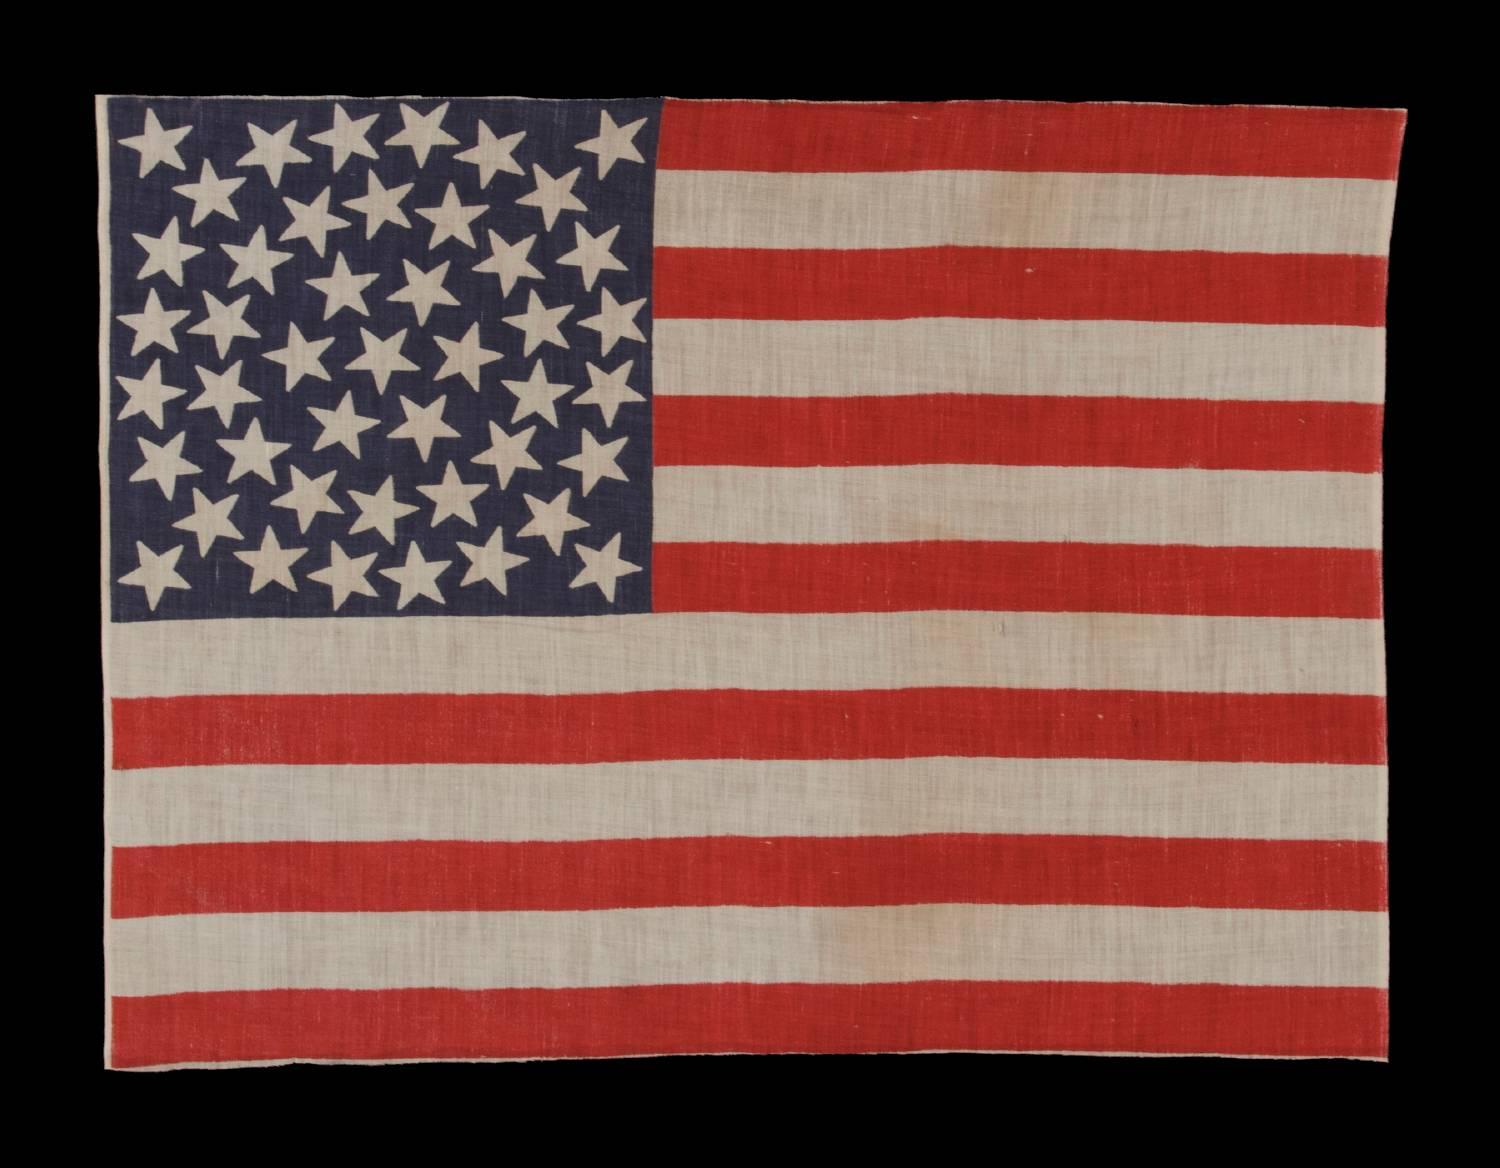 45 stars on an antique American parade flag with a medallion configuration, a rare feature in this period, 1896-1908, Utah statehood, ex-Richard pierce collection:

45 star American parade flag, printed on cotton bunting, with a beautiful,